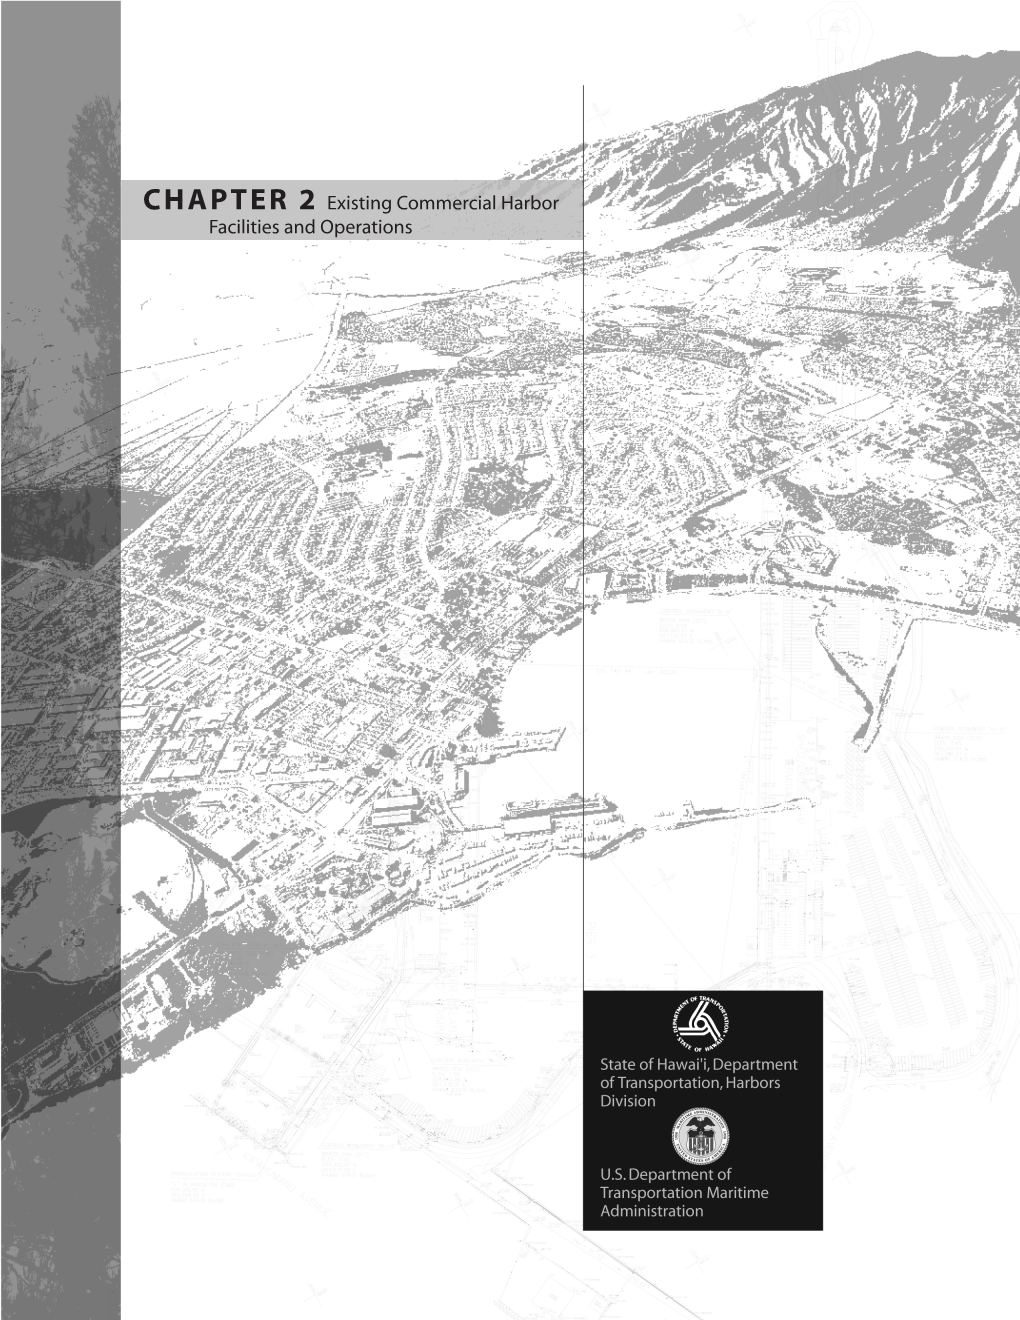 Chapter 2 Existing Commercial Harbor Facilities and Operations